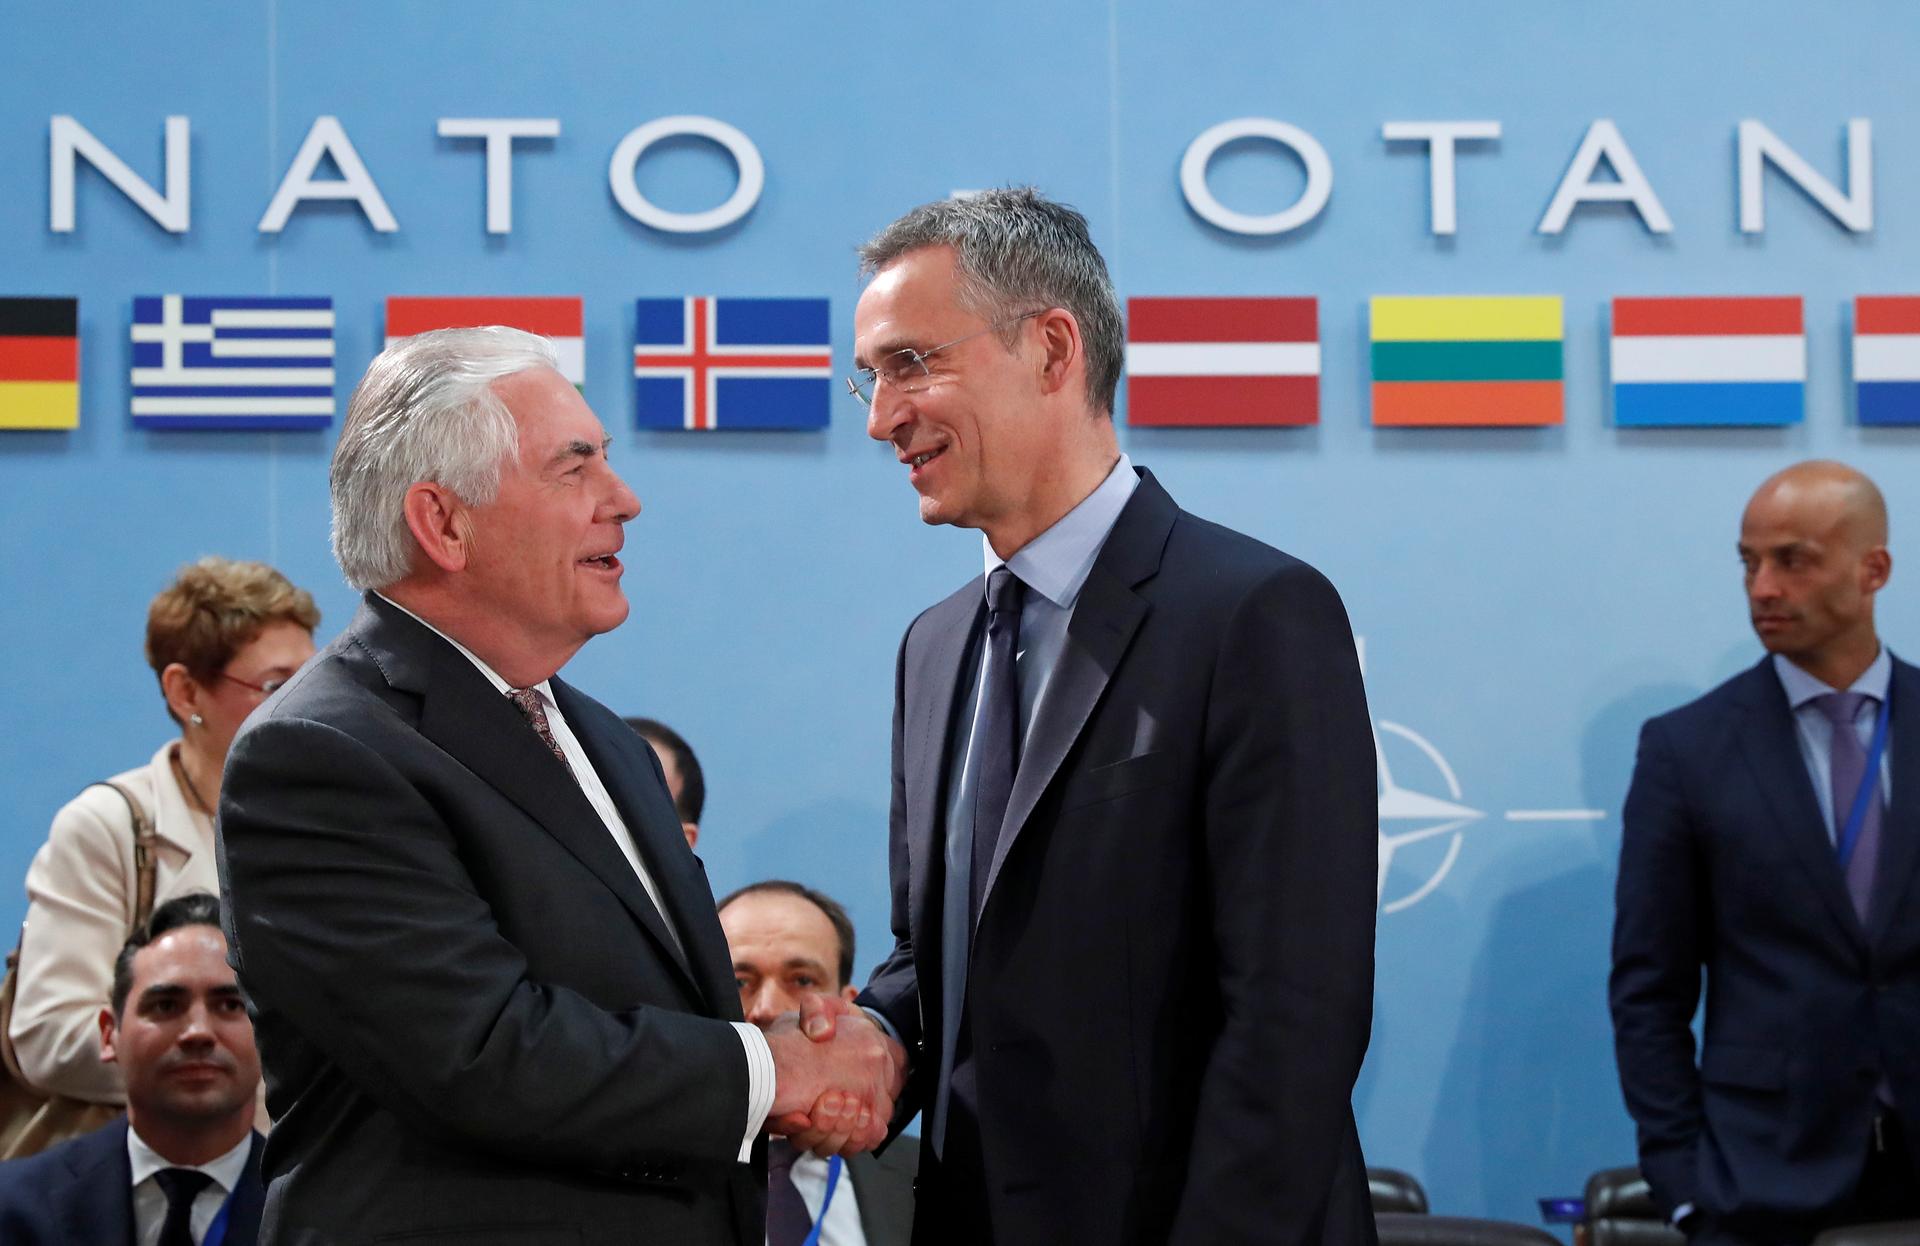 U.S. Secretary of State Rex Tillerson (L) shakes hands with NATO Secretary General Jens Stoltenberg during a NATO foreign ministers meeting at the Alliance's headquarters in Brussels.